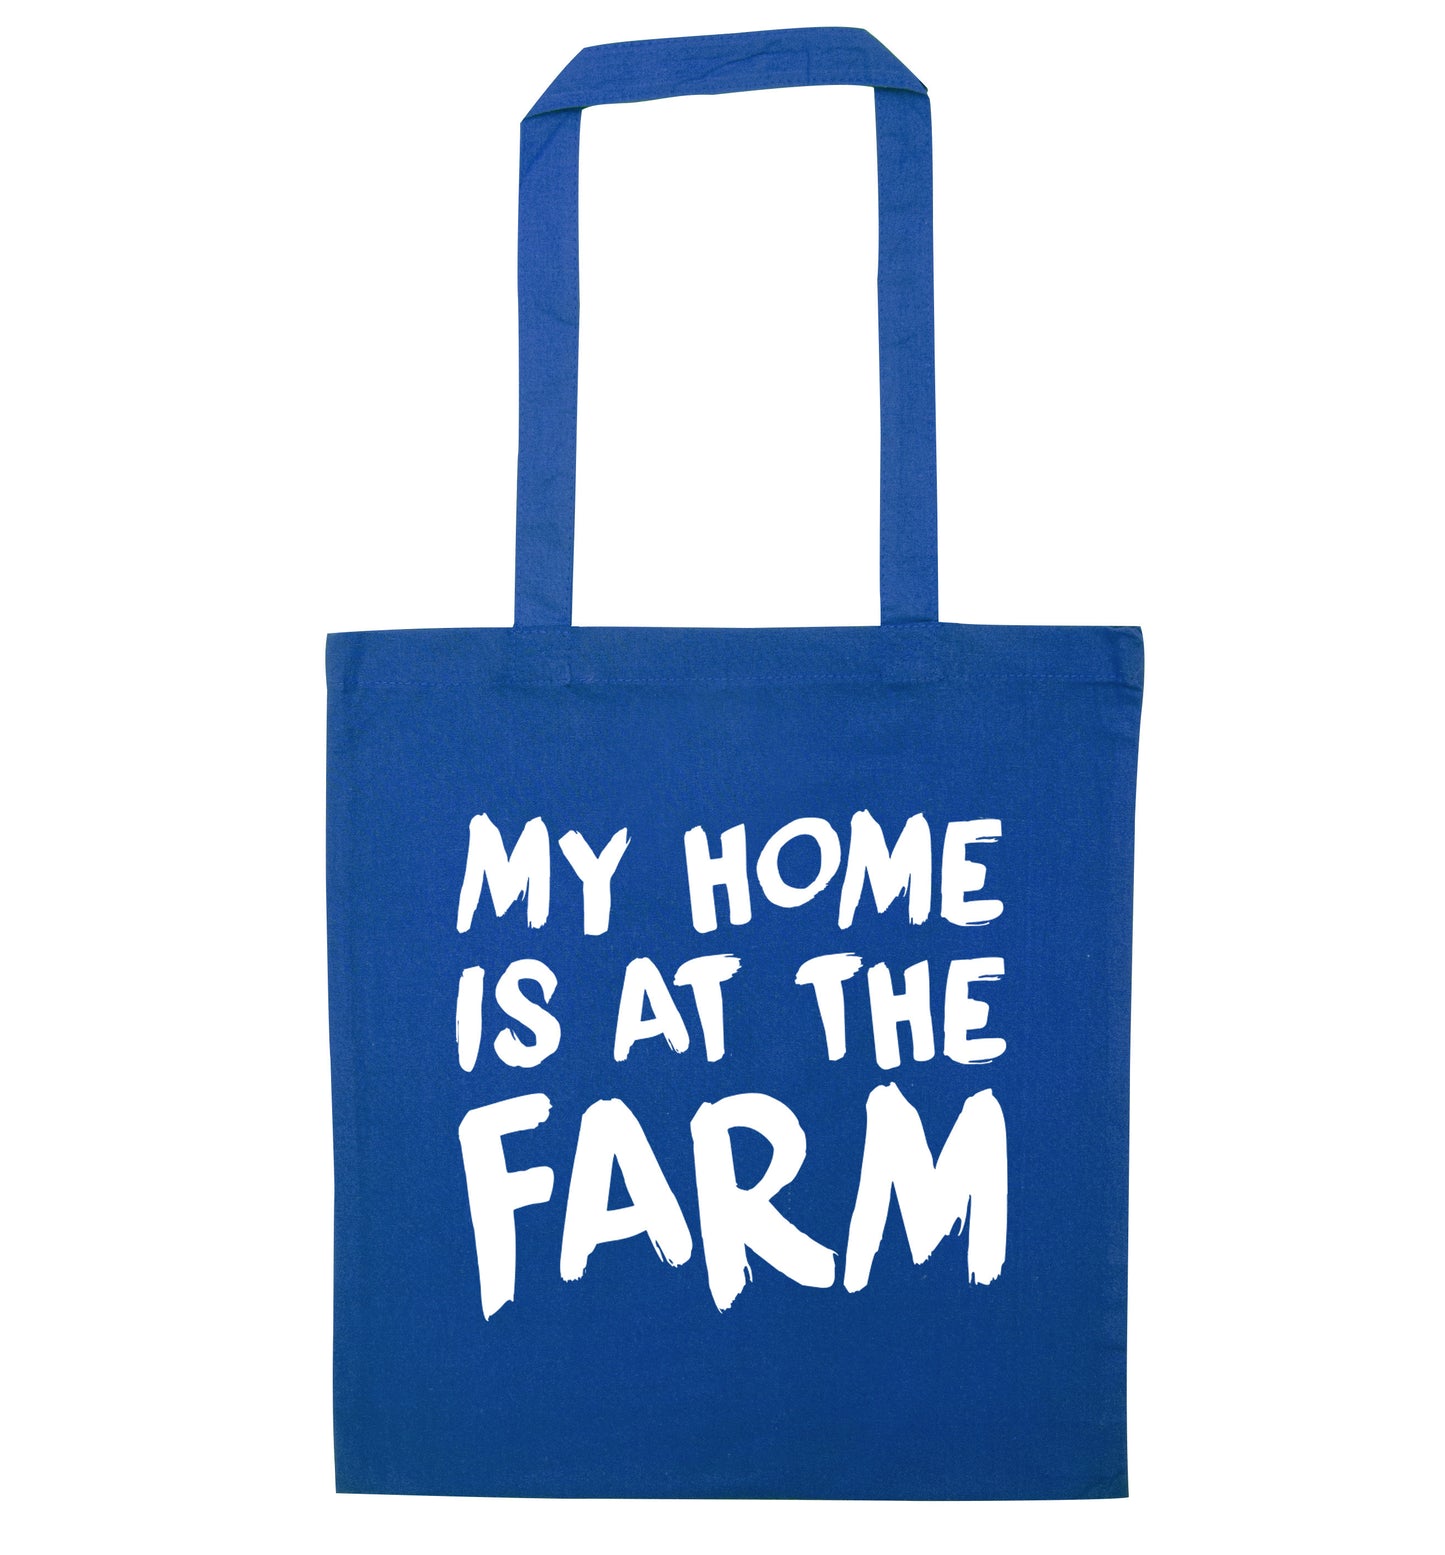 My home is at the farm blue tote bag